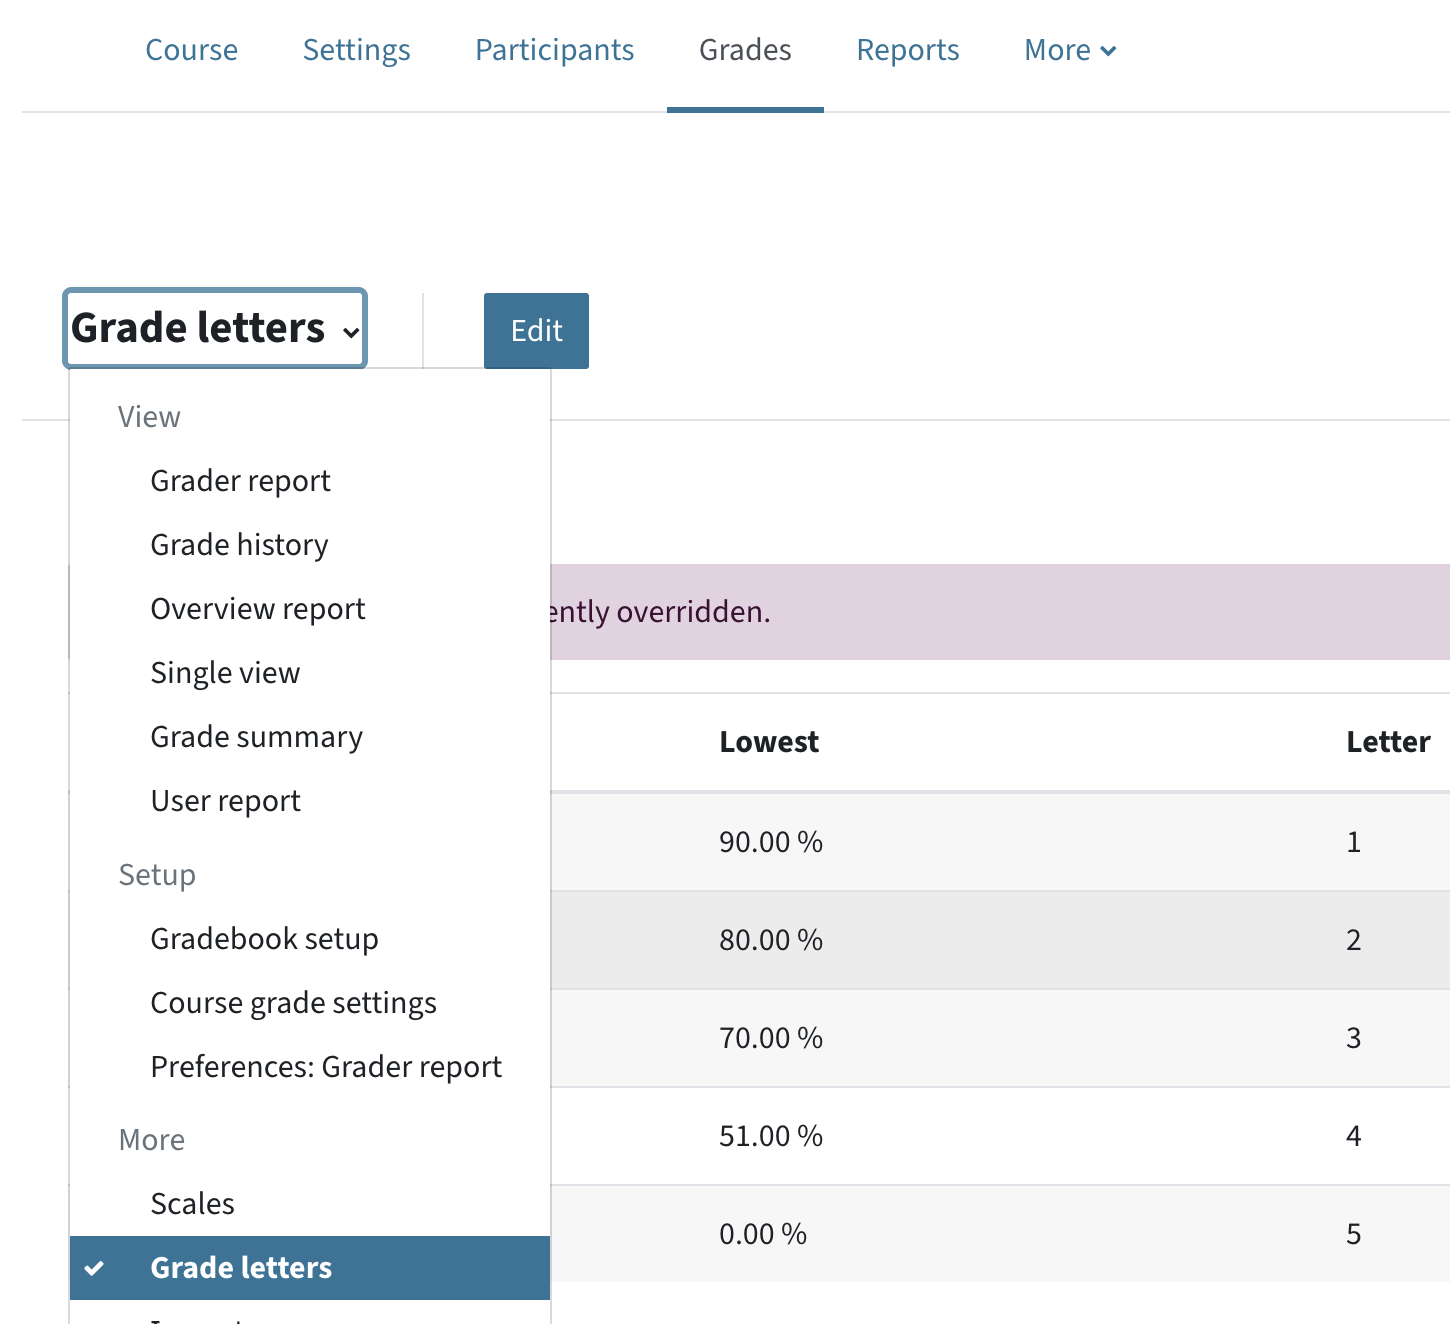 Grades - Grade letters is selected in the menu